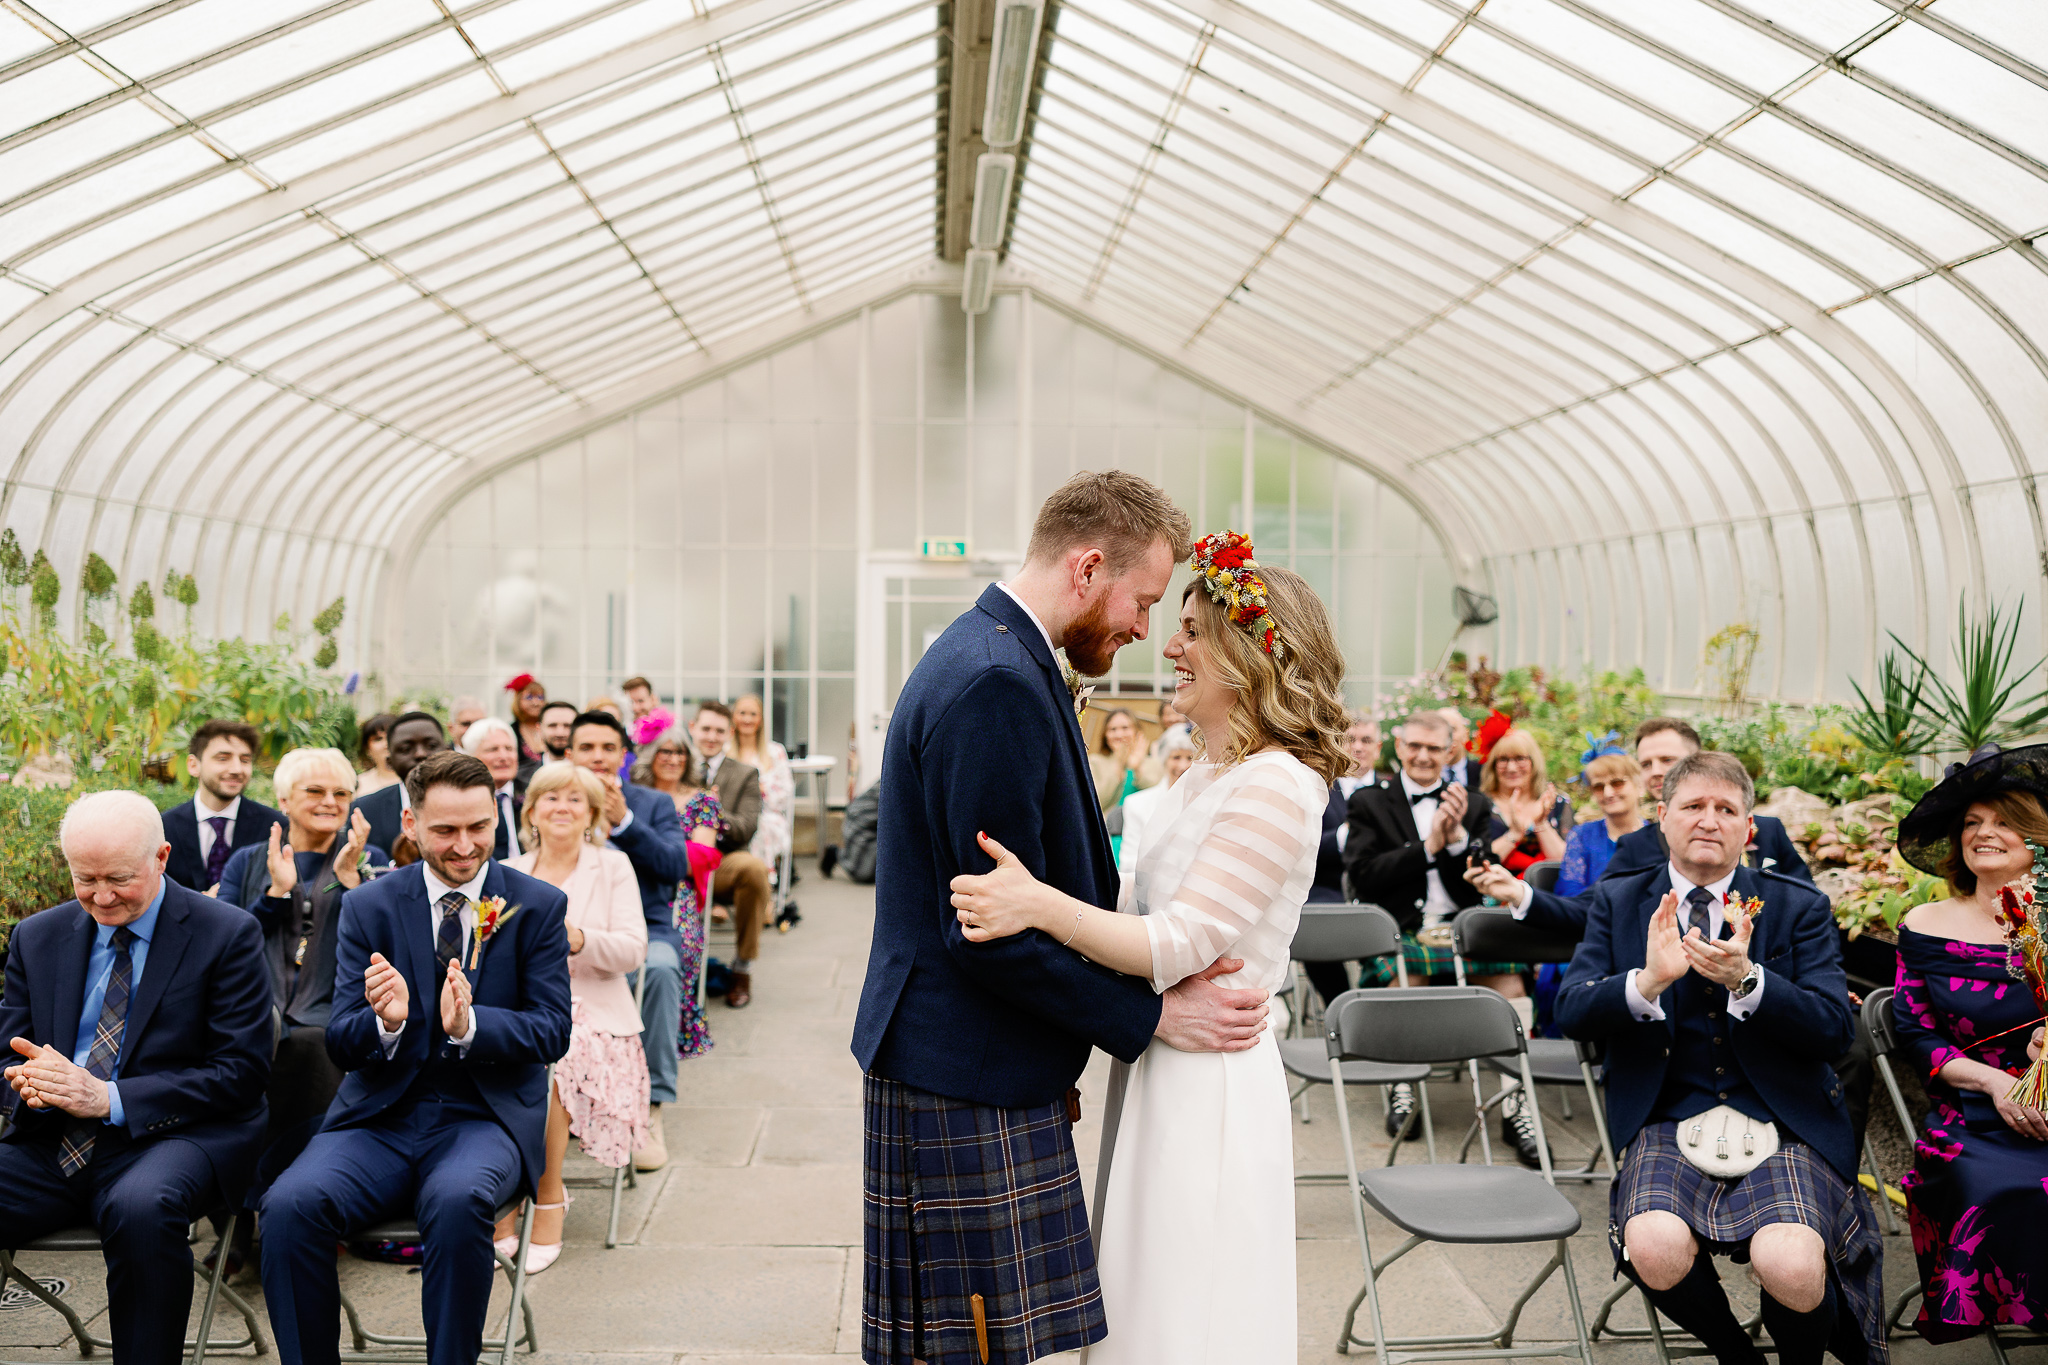 Just married in a glasshouse in Scotland 